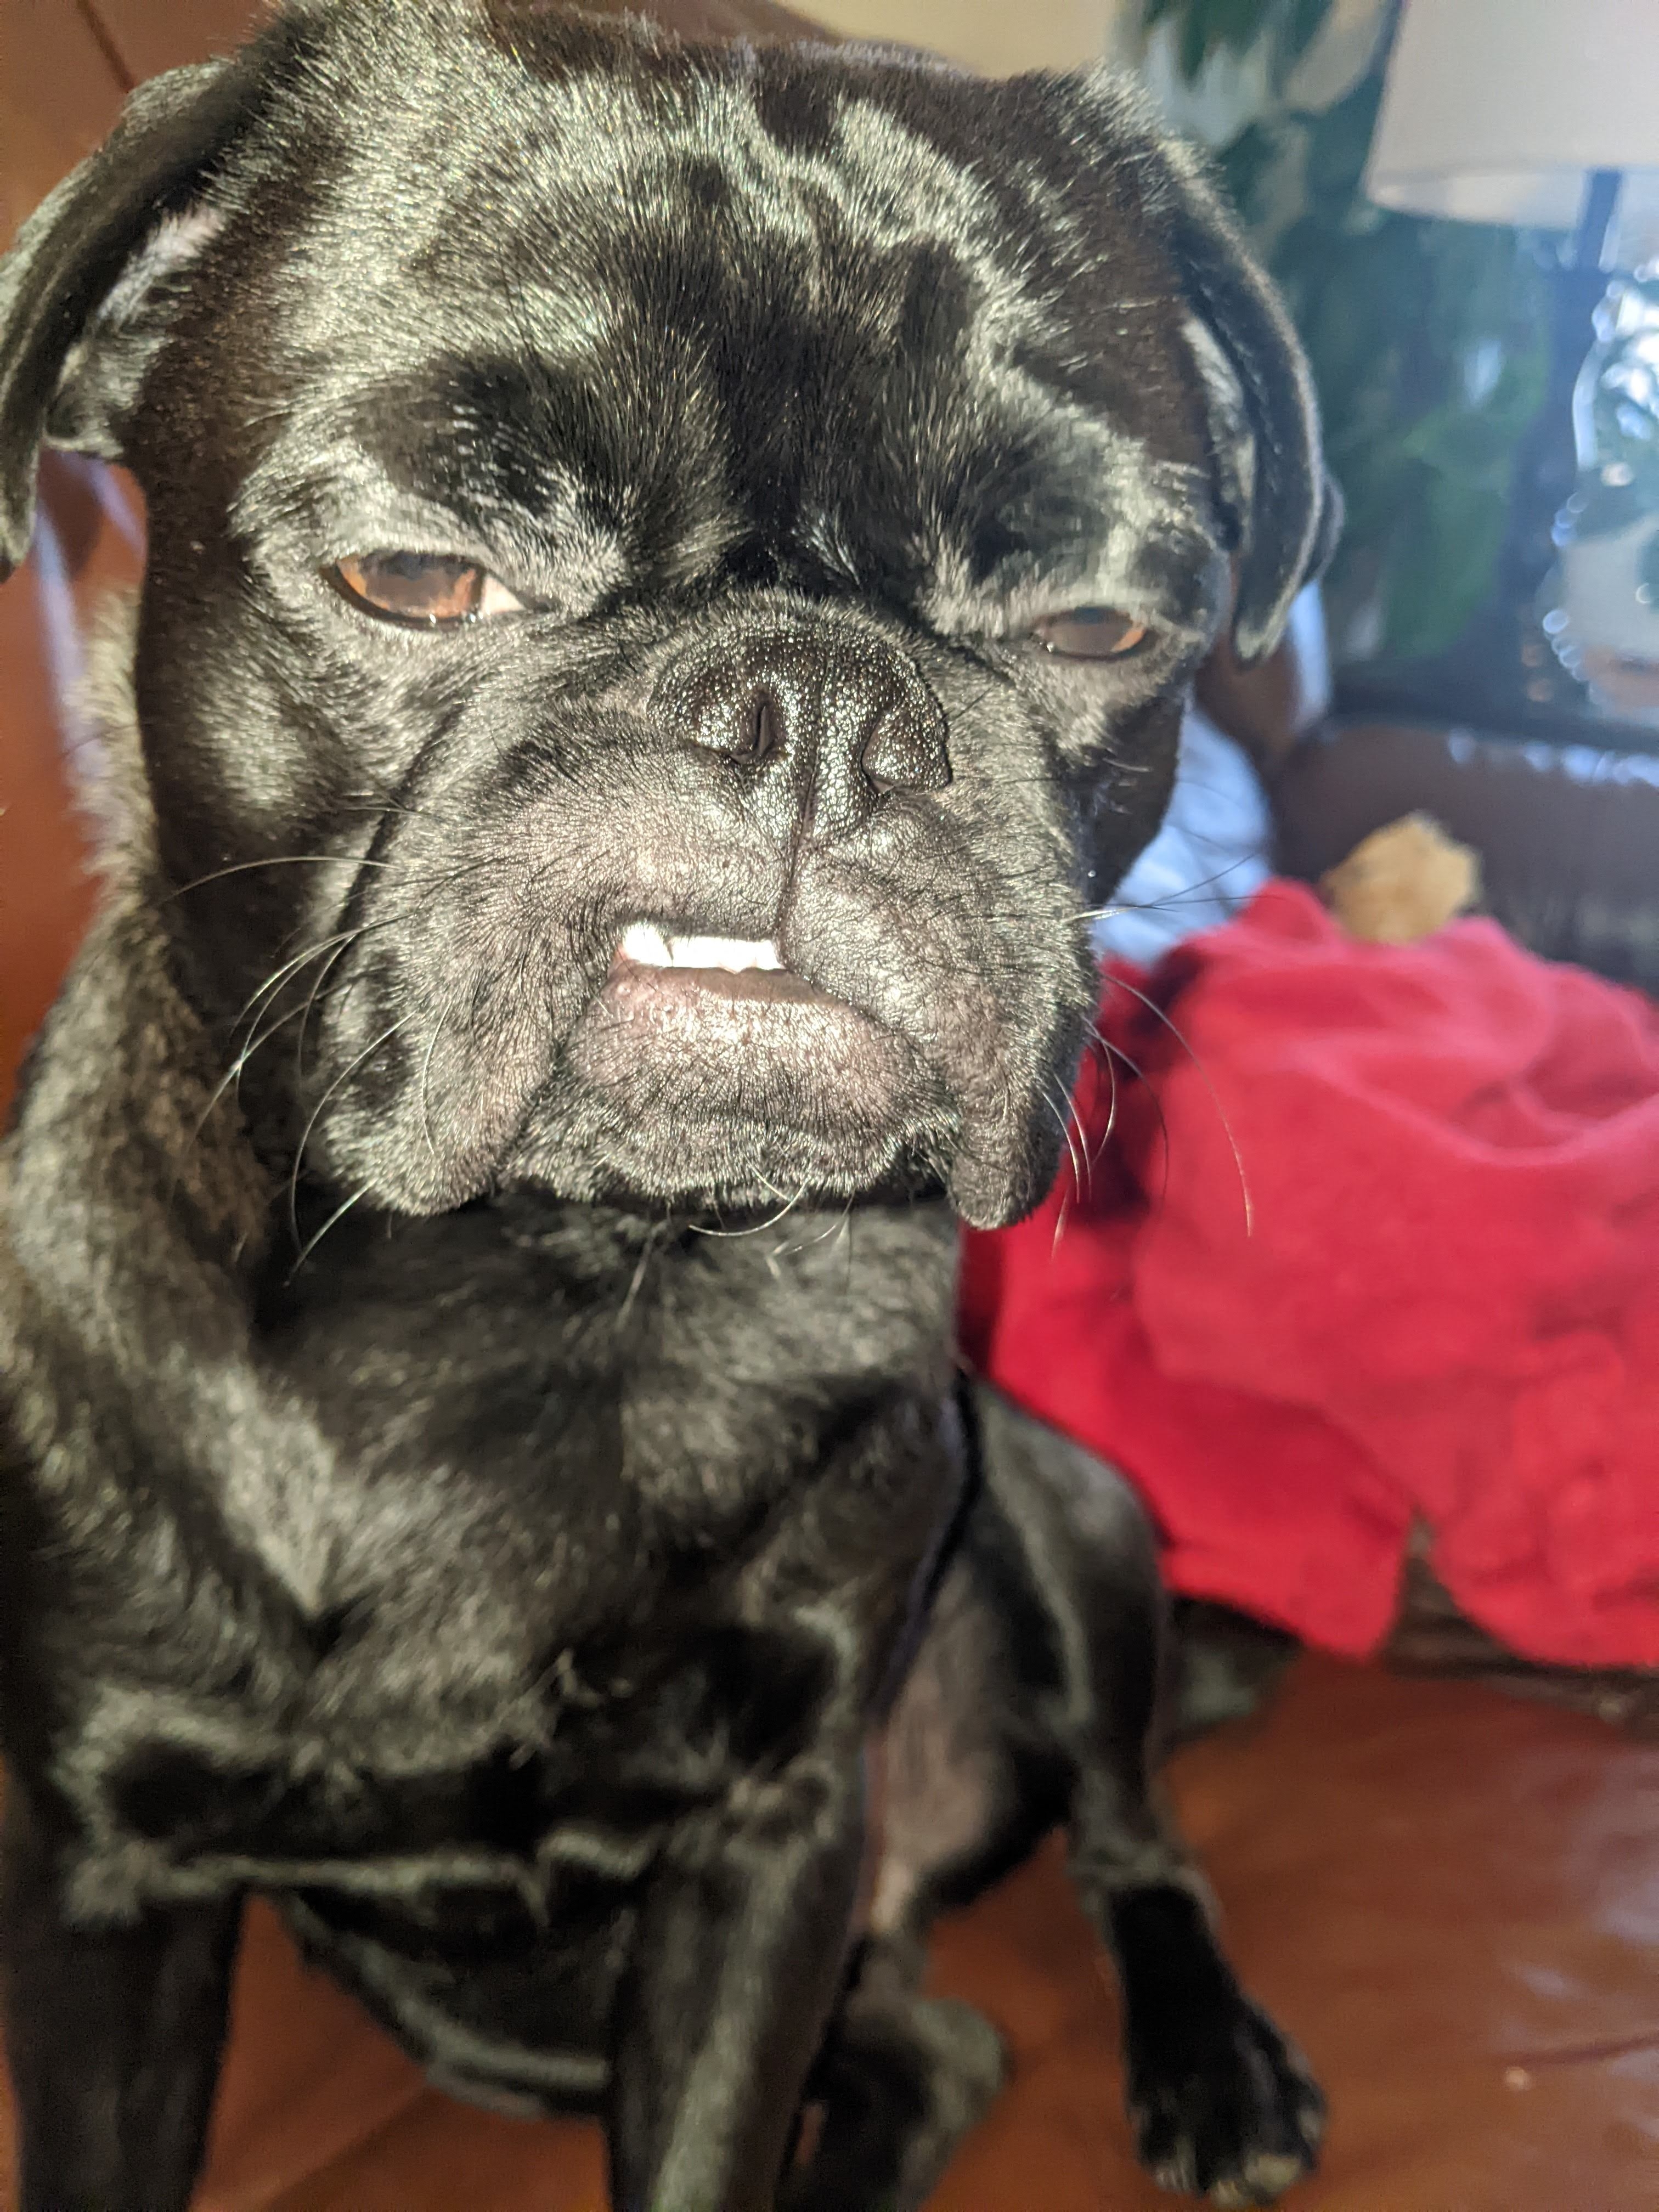 A black pug with a slight underbite showing and eyes half closed